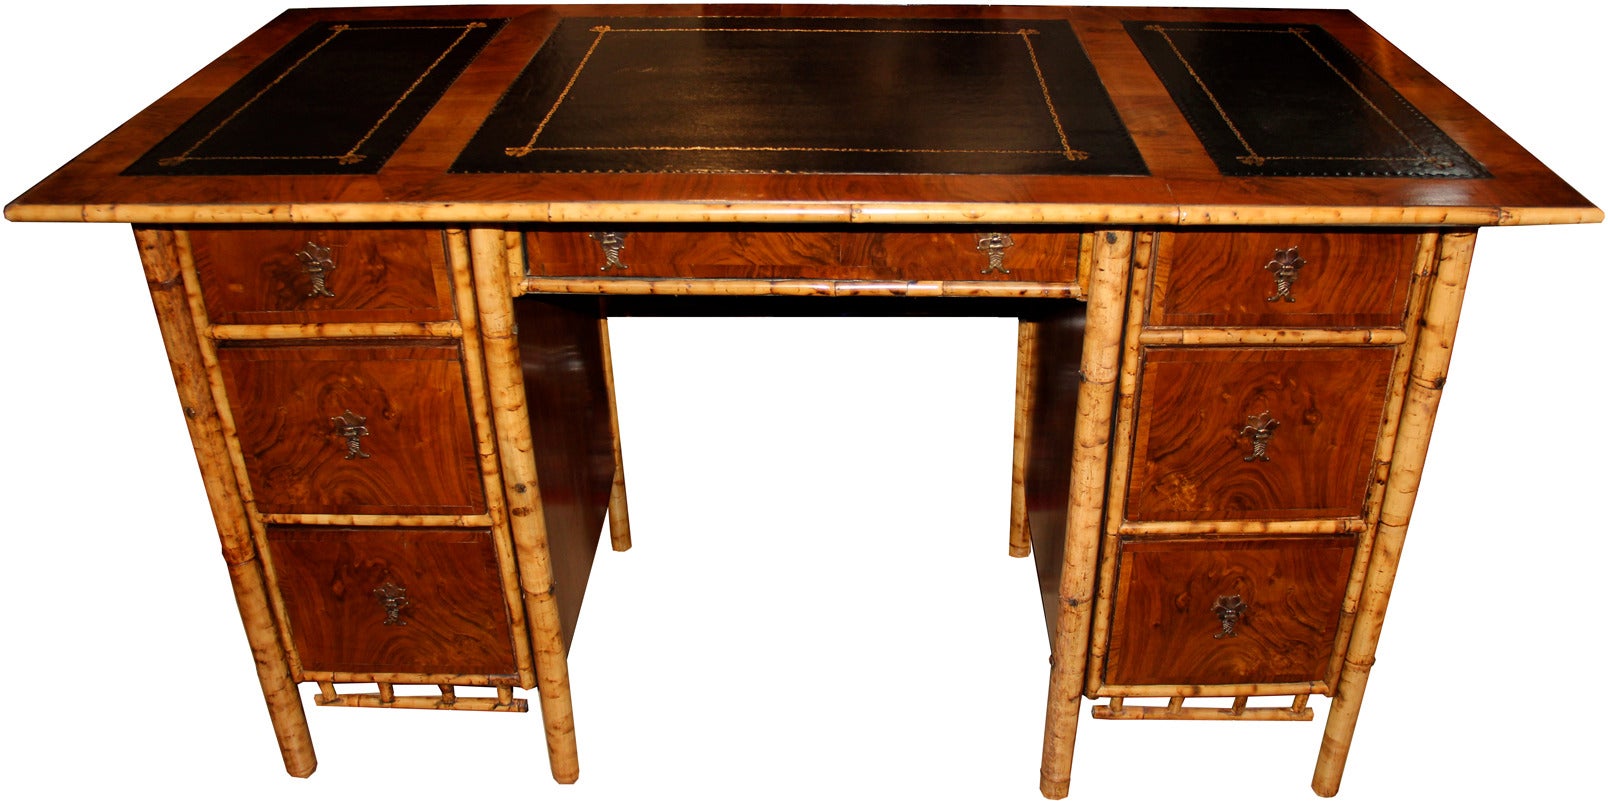 Exotic 19th Century English Import Bamboo and Walnut Pedestal Desk For Sale